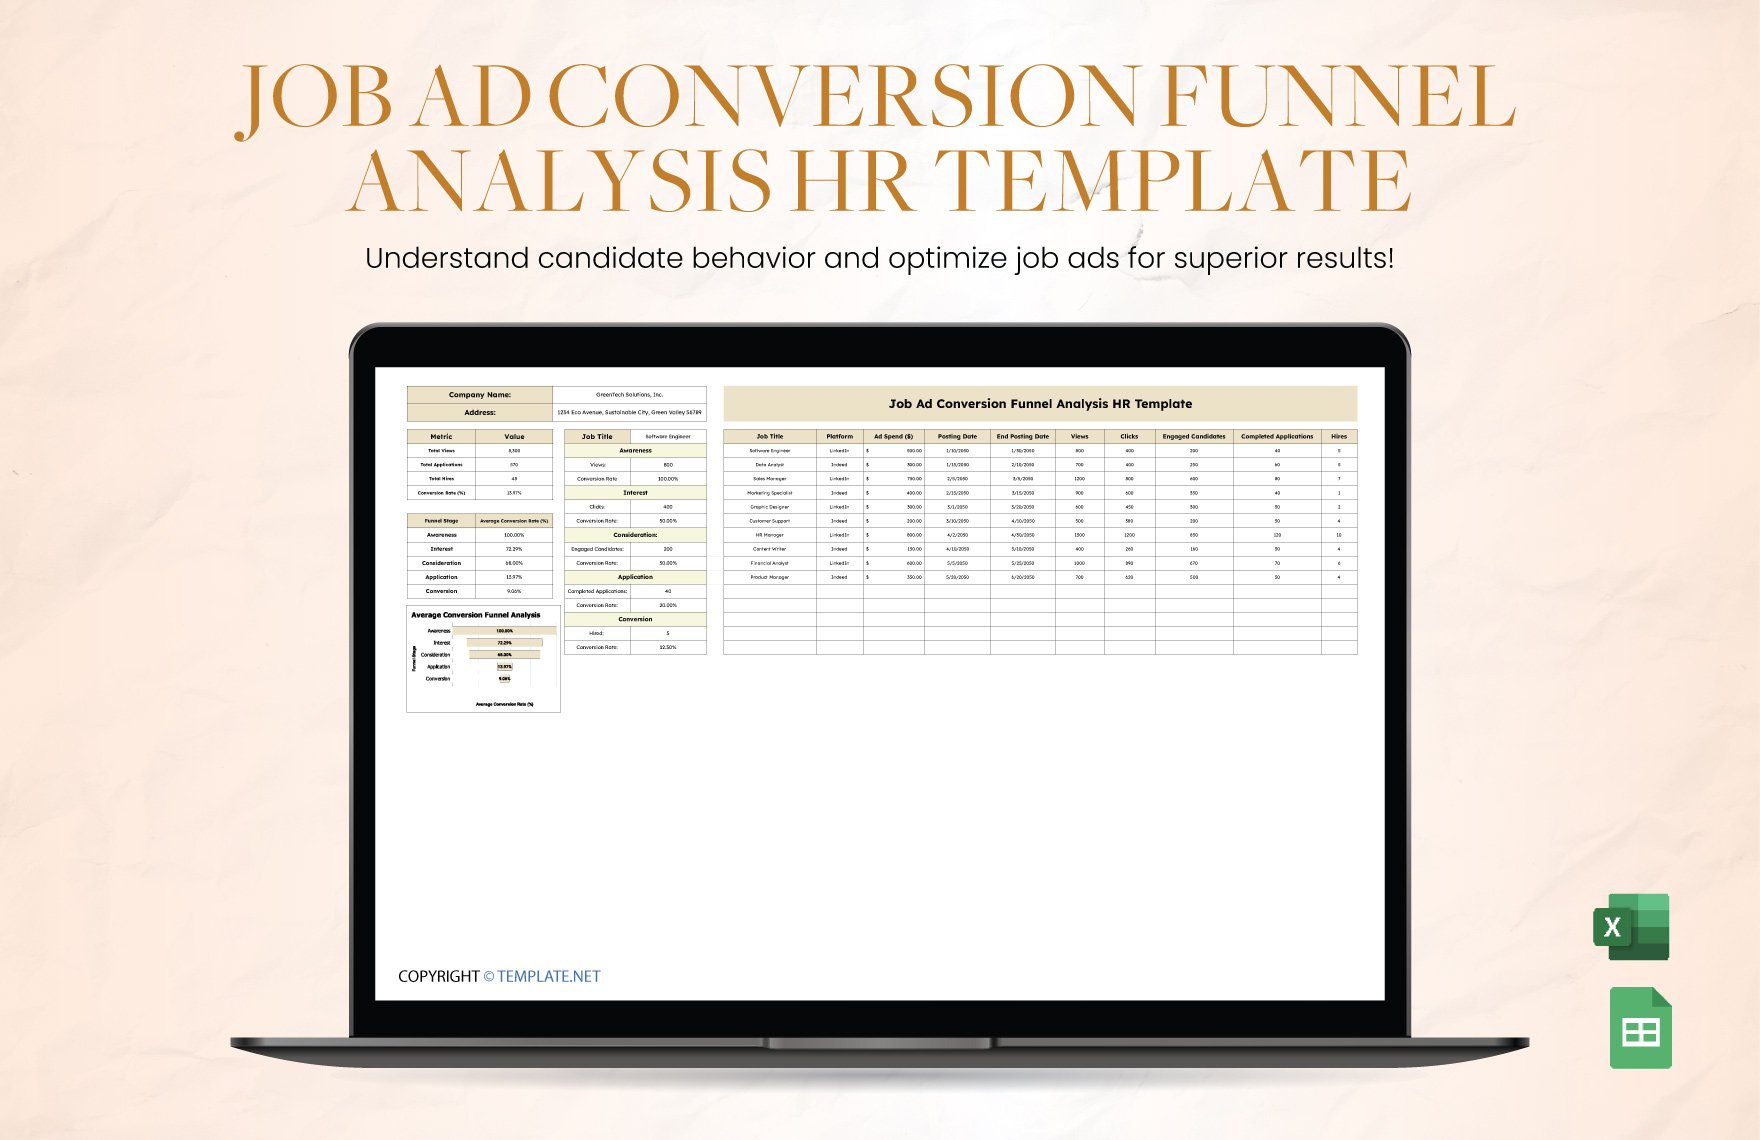 Job Ad Conversion Funnel Analysis HR Template